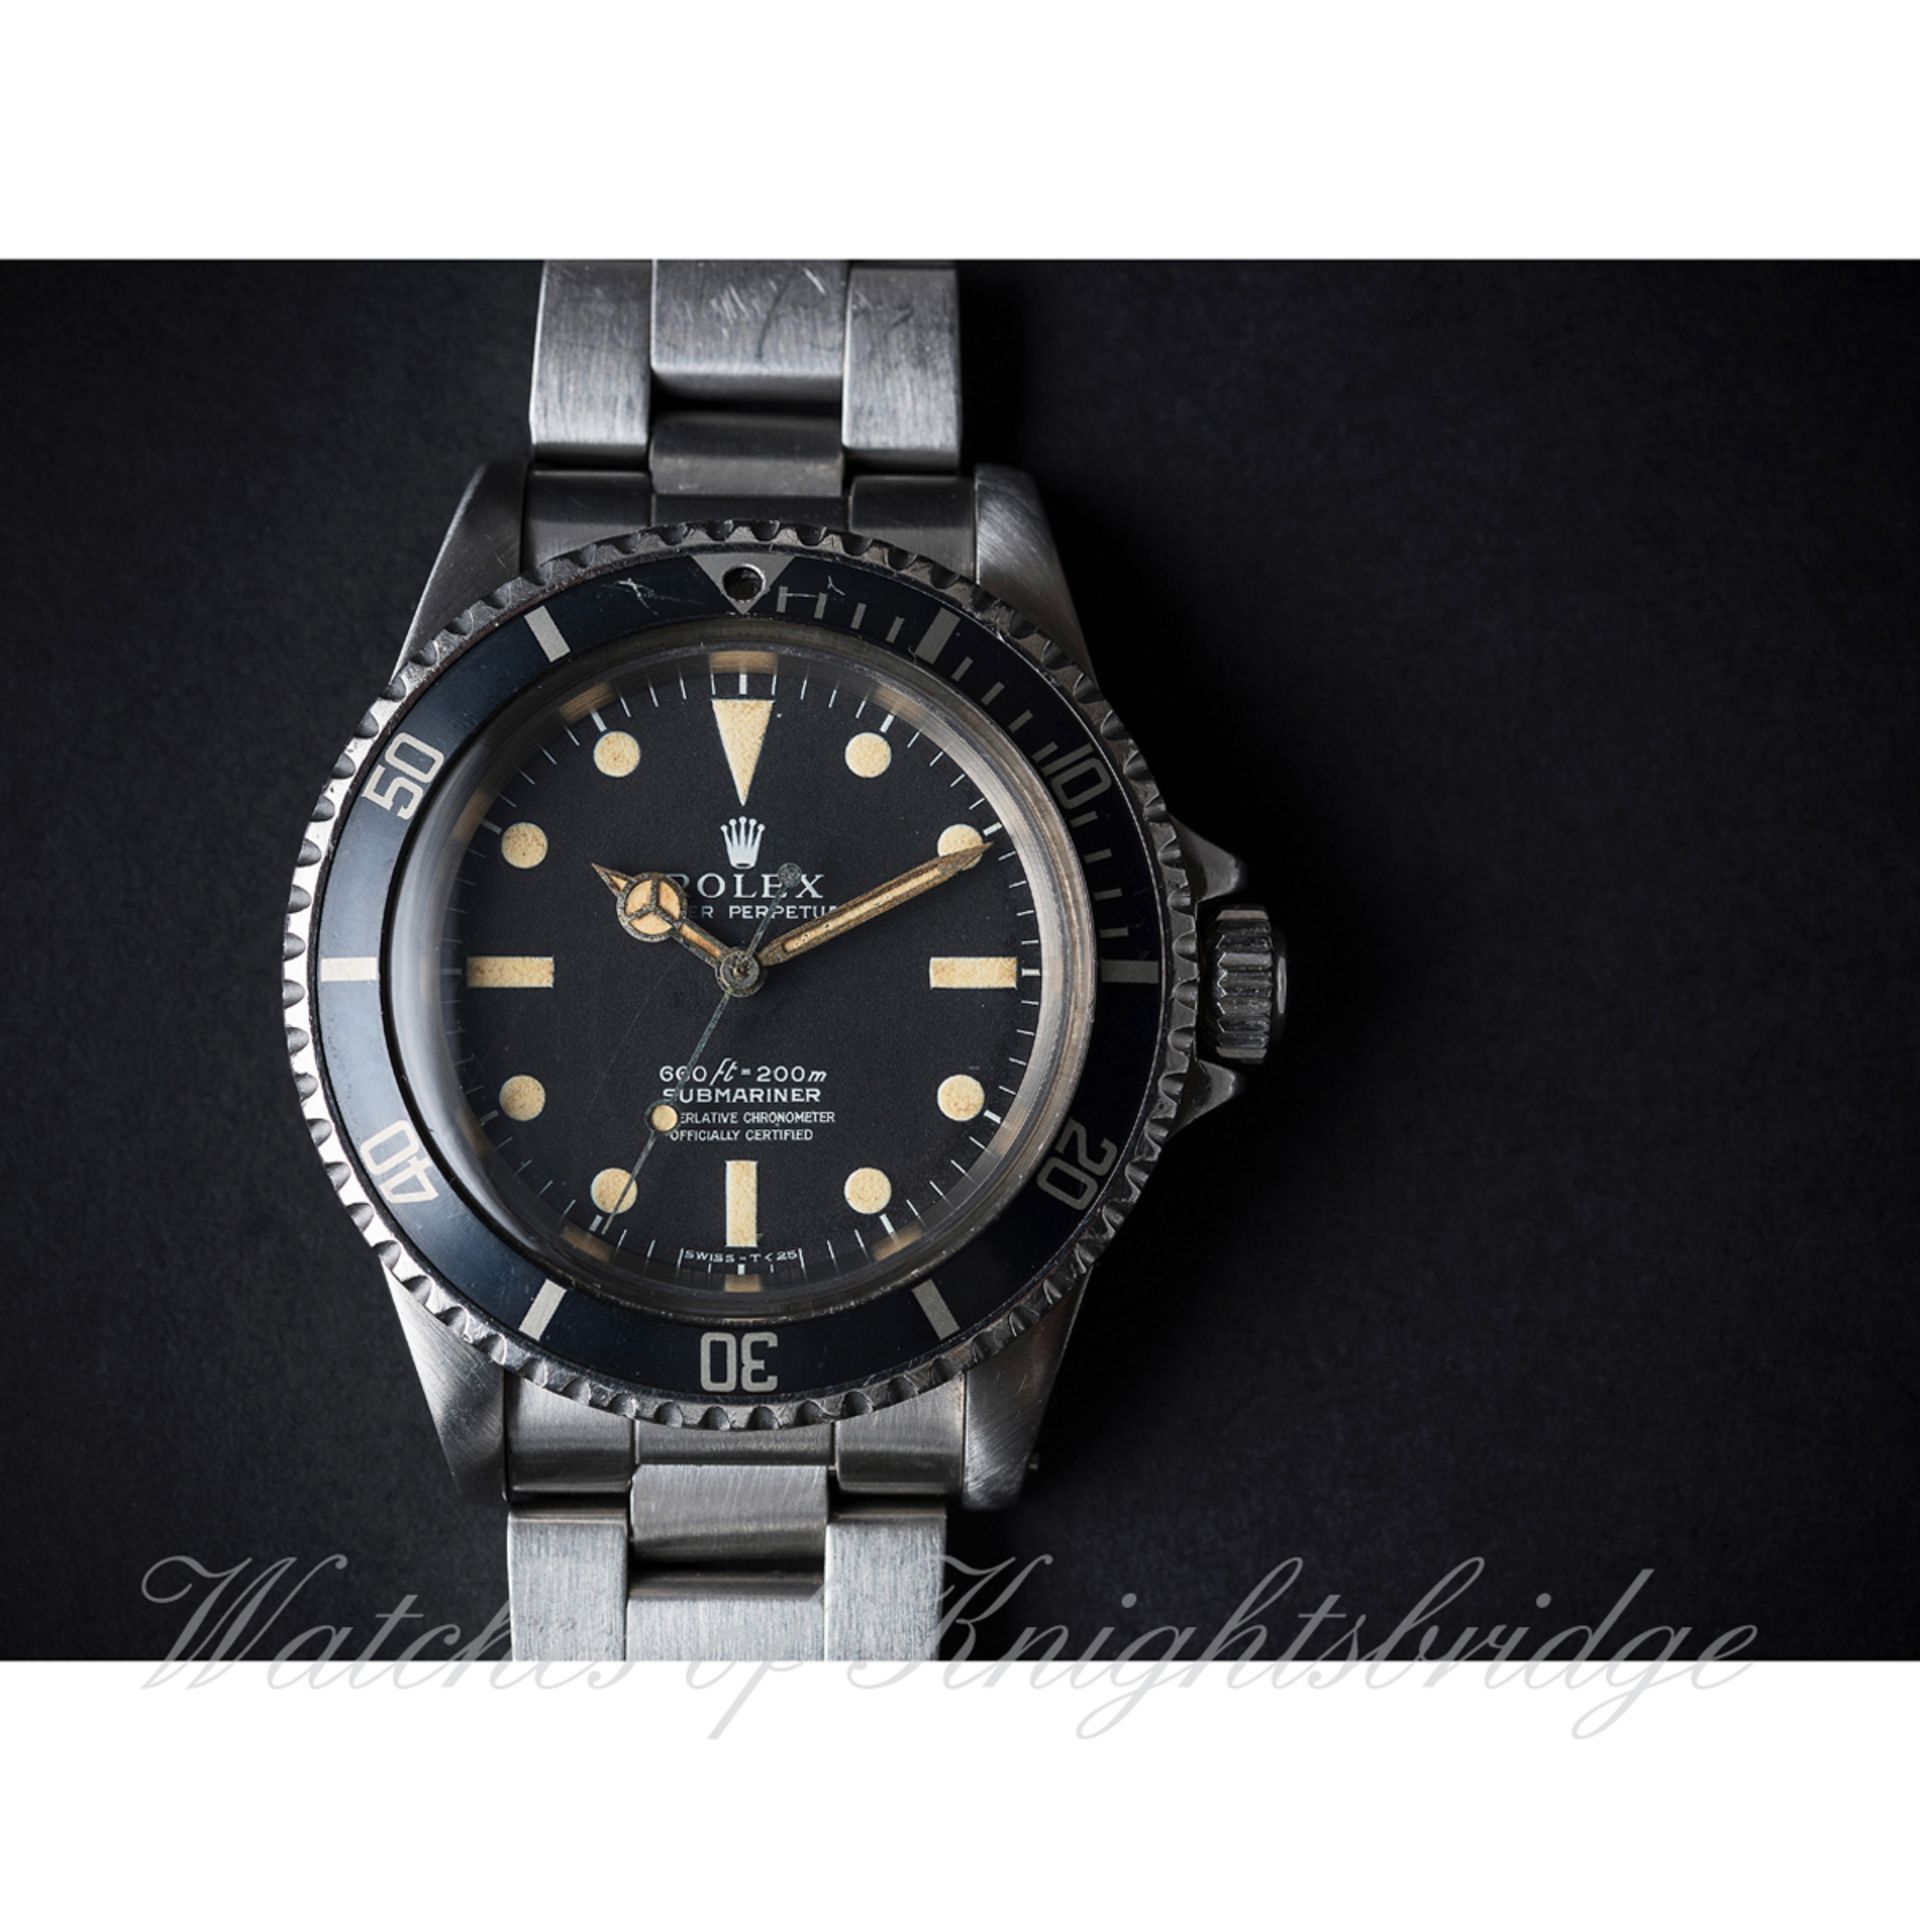 A RARE GENTLEMAN'S STAINLESS STEEL ROLEX OYSTER PERPETUAL SUBMARINER CHRONOMETER BRACELET WATCH - Image 2 of 2